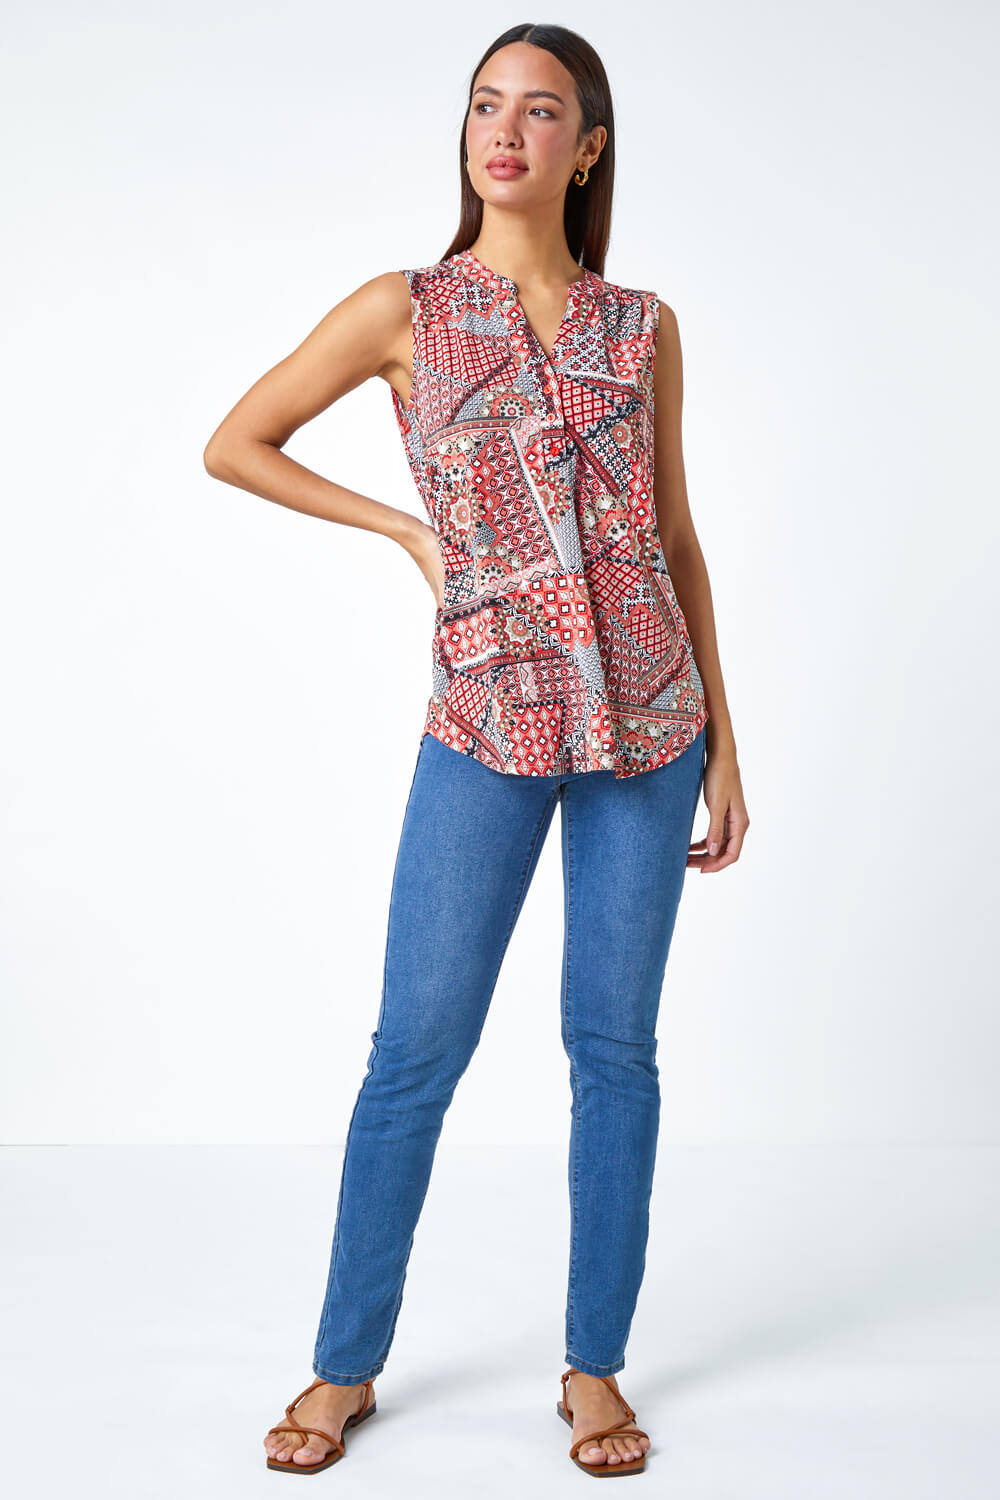 Red Textured Patchwork Sleeveless Stretch Top, Image 2 of 5